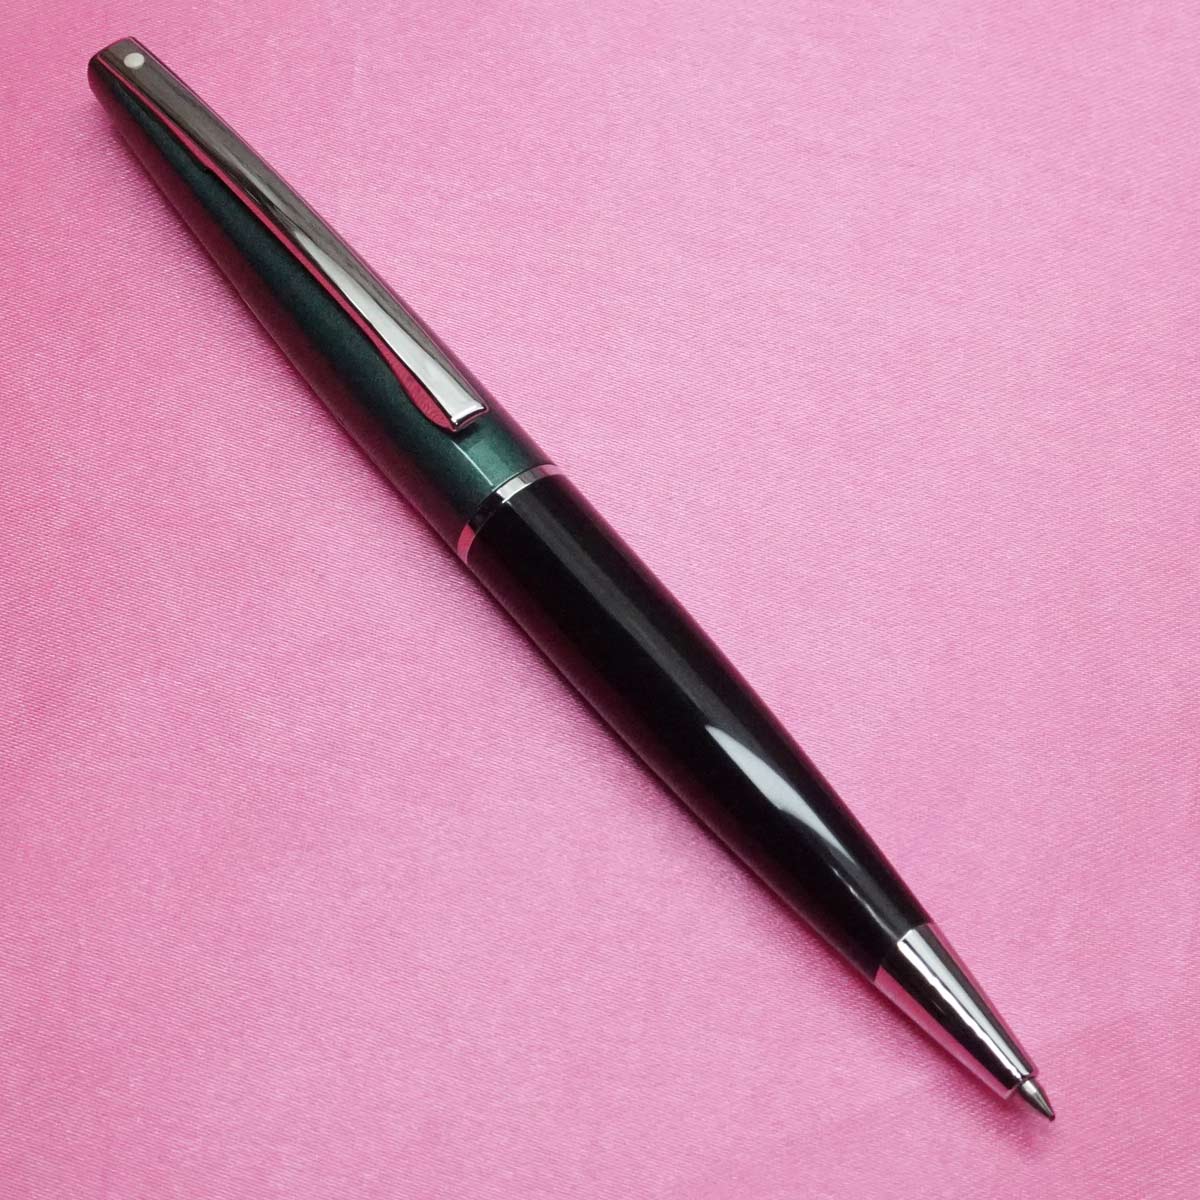 Sheaffer Model: 10720  Taranis® Forest Black color body with Green Featuring Chrome Plate Trim ball pen